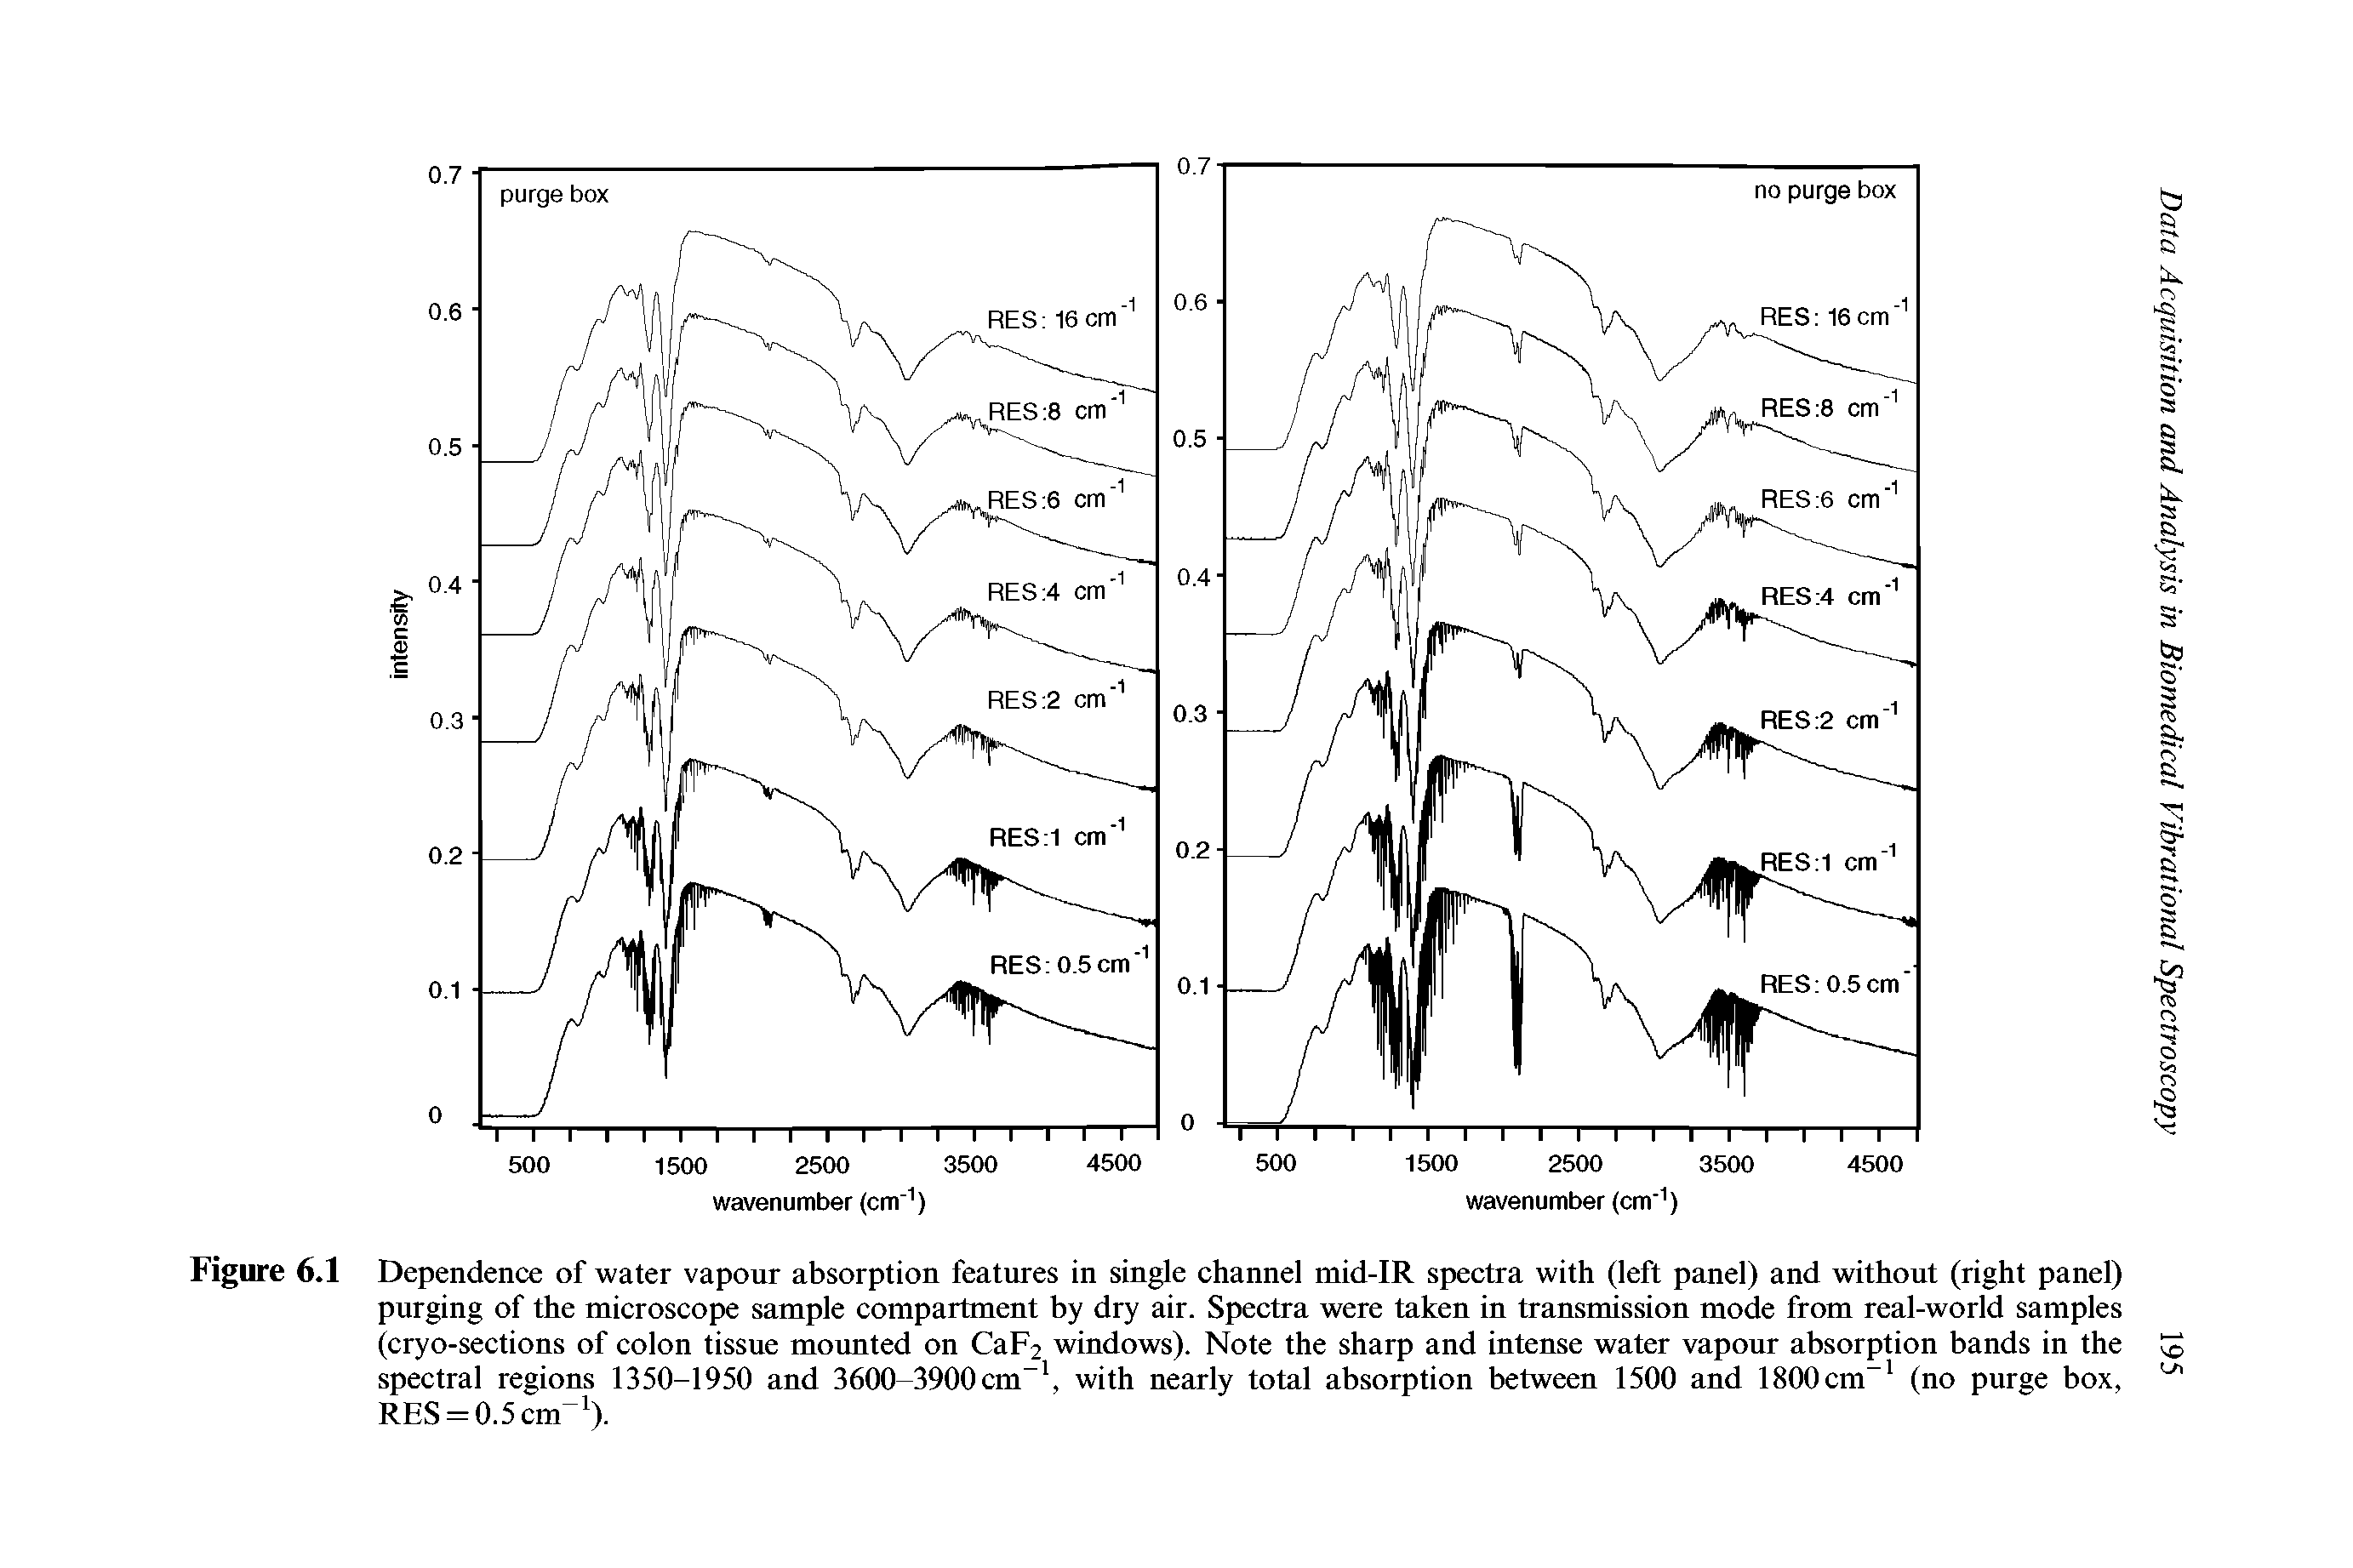 Figure 6.1 Dependence of water vapour absorption features in single channel mid-IR spectra with (left panel) and without (right panel) purging of the microscope sample compartment by dry air. Spectra were taken in transmission mode from real-world samples (cryo-sections of colon tissue mounted on Cap2 windows). Note the sharp and intense water vapour absorption bands in the spectral regions 1350-1950 and 3600-3900cm , with nearly total absorption between 1500 and 1800cm (no purge box,...